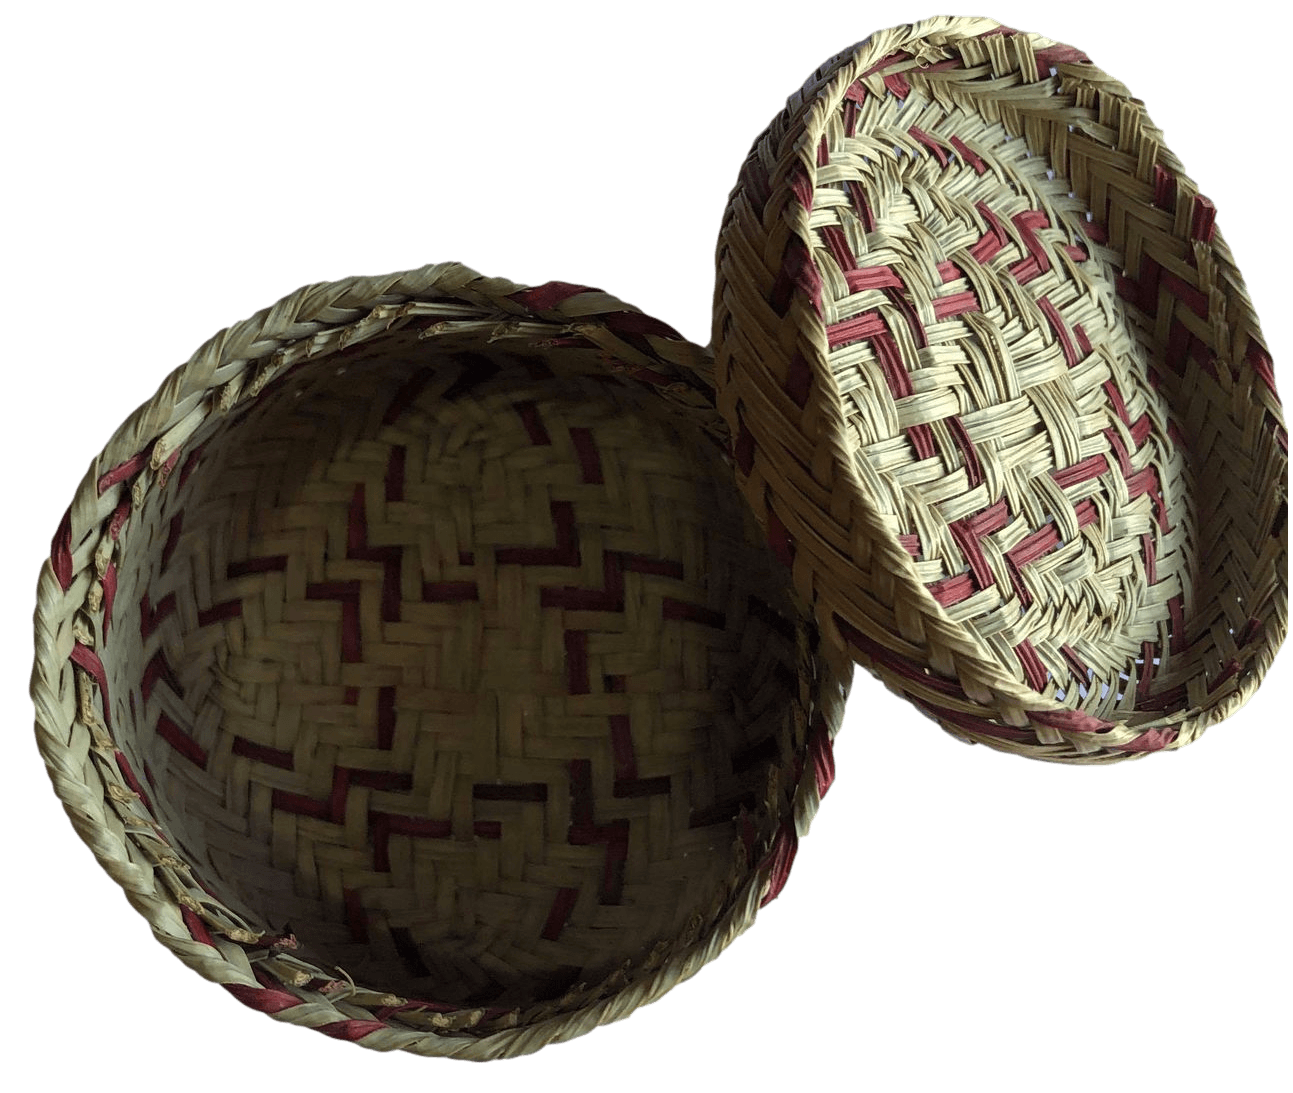 Basket Lid Natural Reed Handcrafted by Tarahumara Indian Mexico 3"H x 3"W Rust Accent - Ysleta Mission Gift Shop- VOTED El Paso's Best Gift Shop